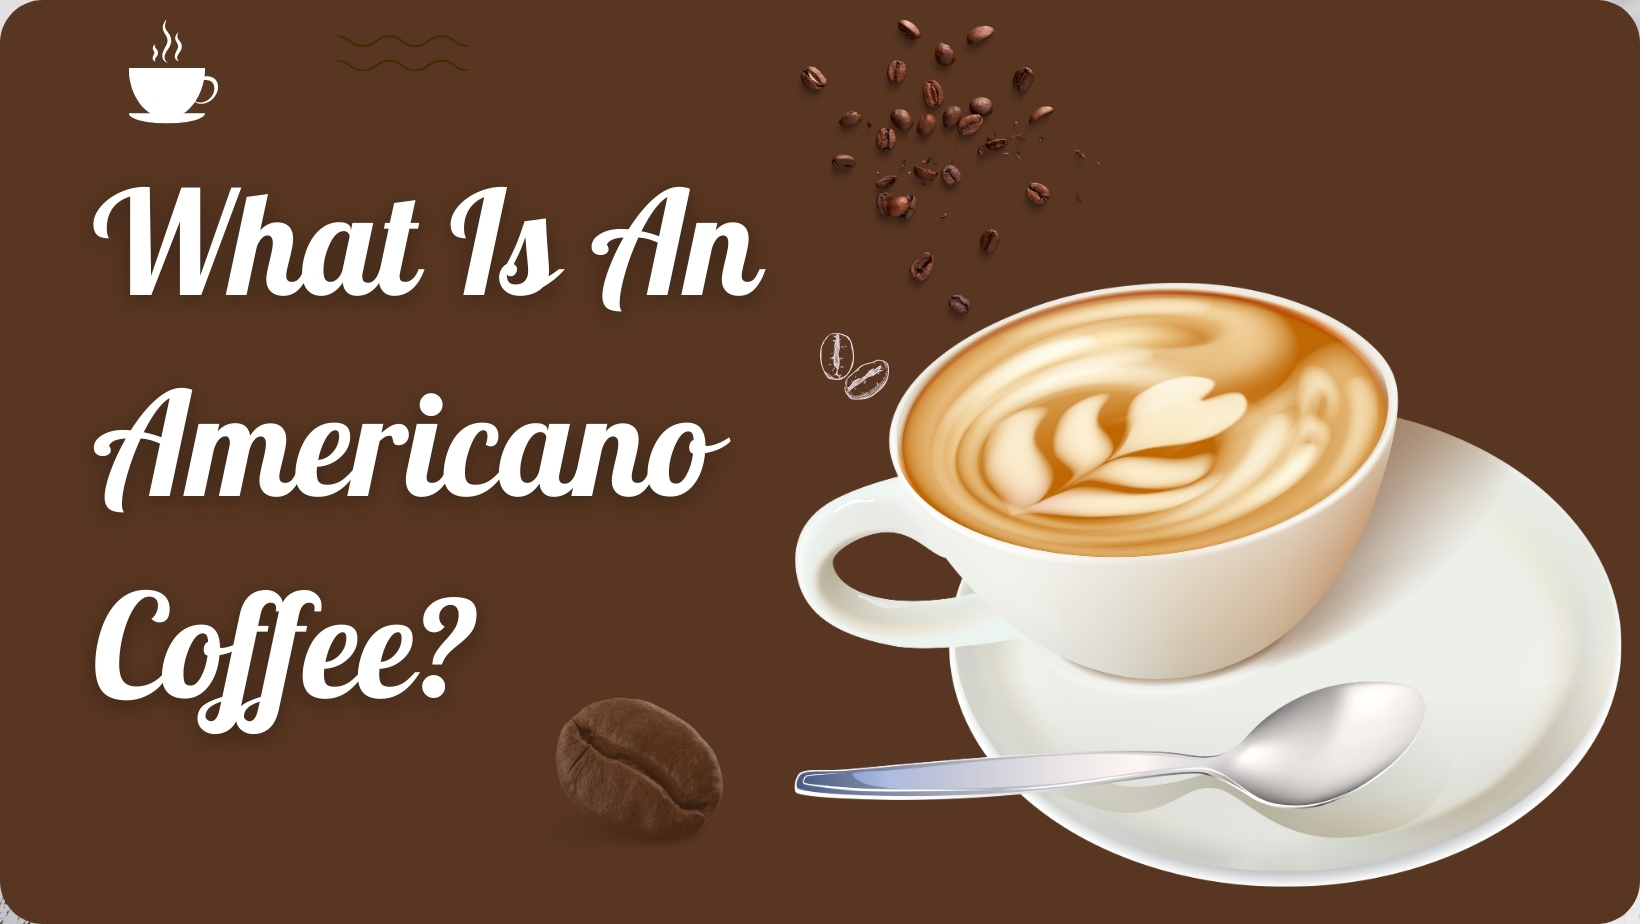 What Is An Americano Coffee?